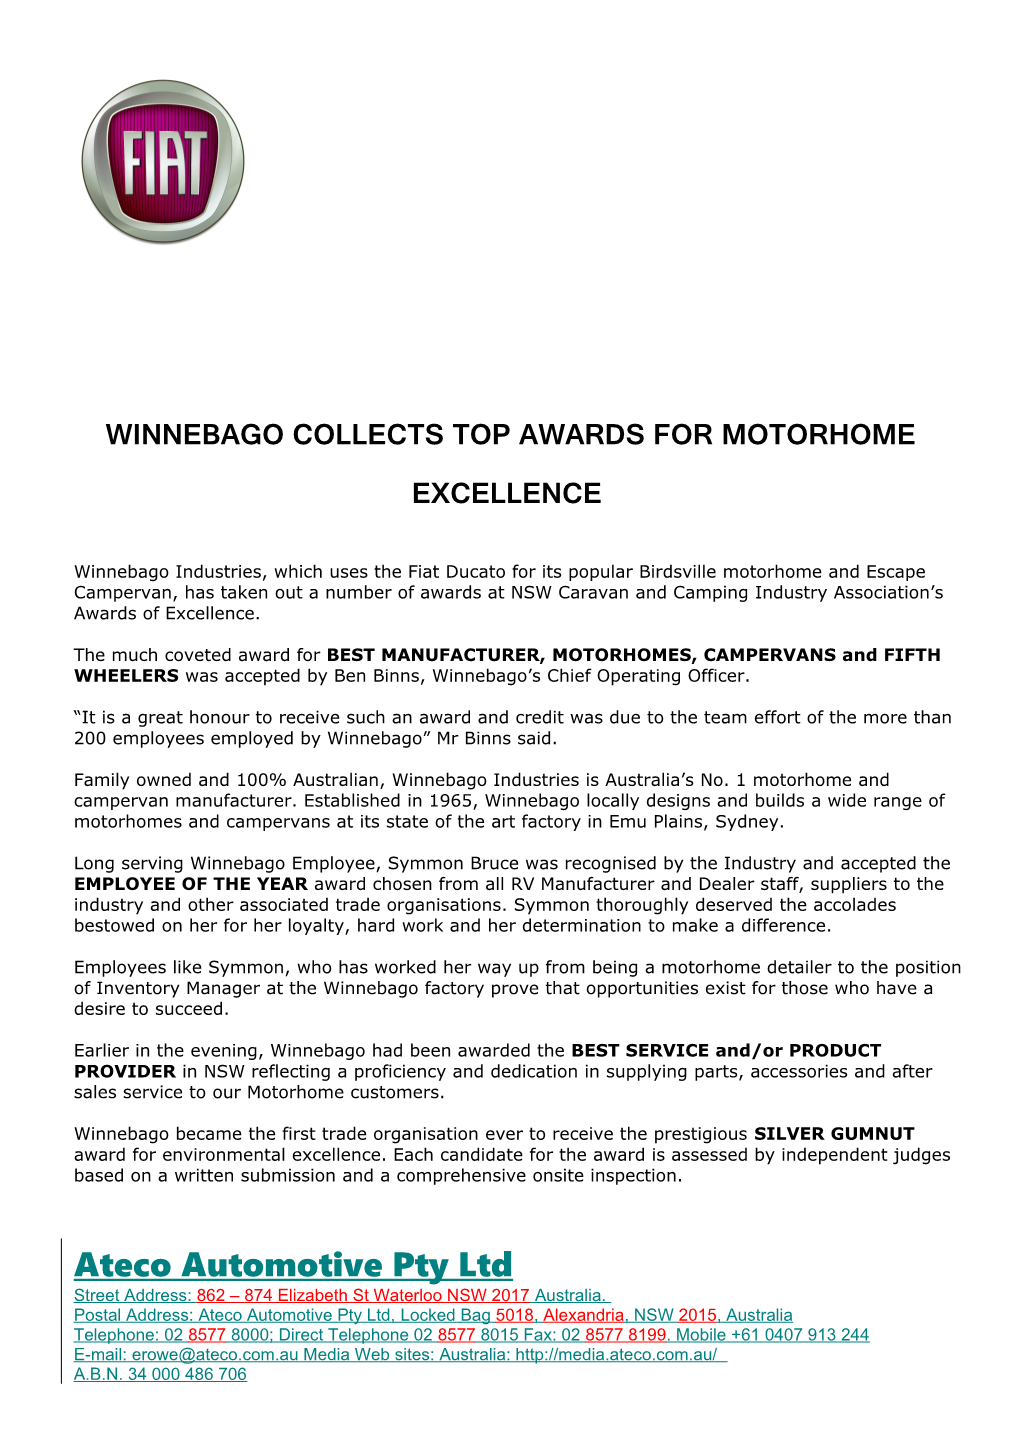 Winnebago Collects Top Awards for Motorhome Excellence